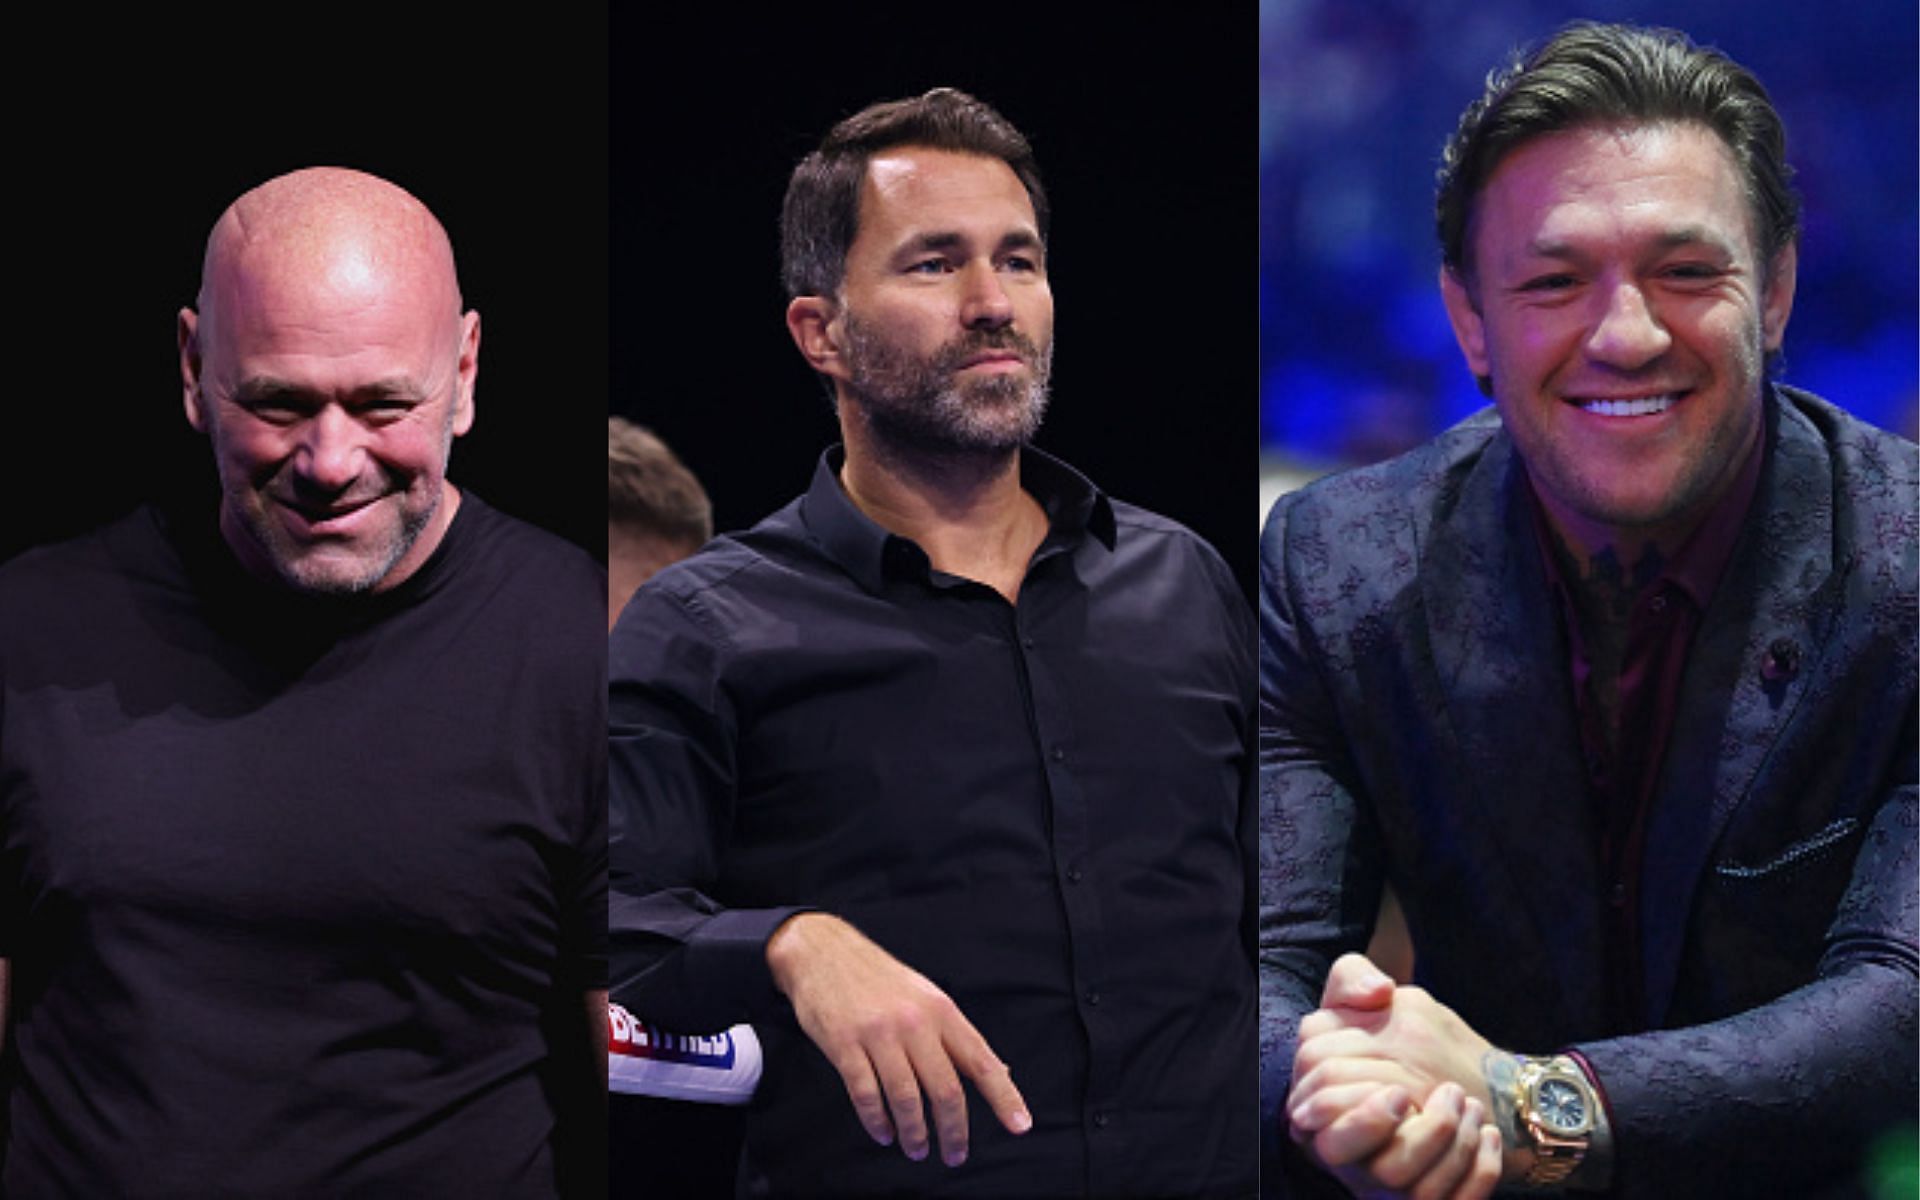 From left to right: Dana White, Eddie Hearn, Conor McGregor [all images via Getty]